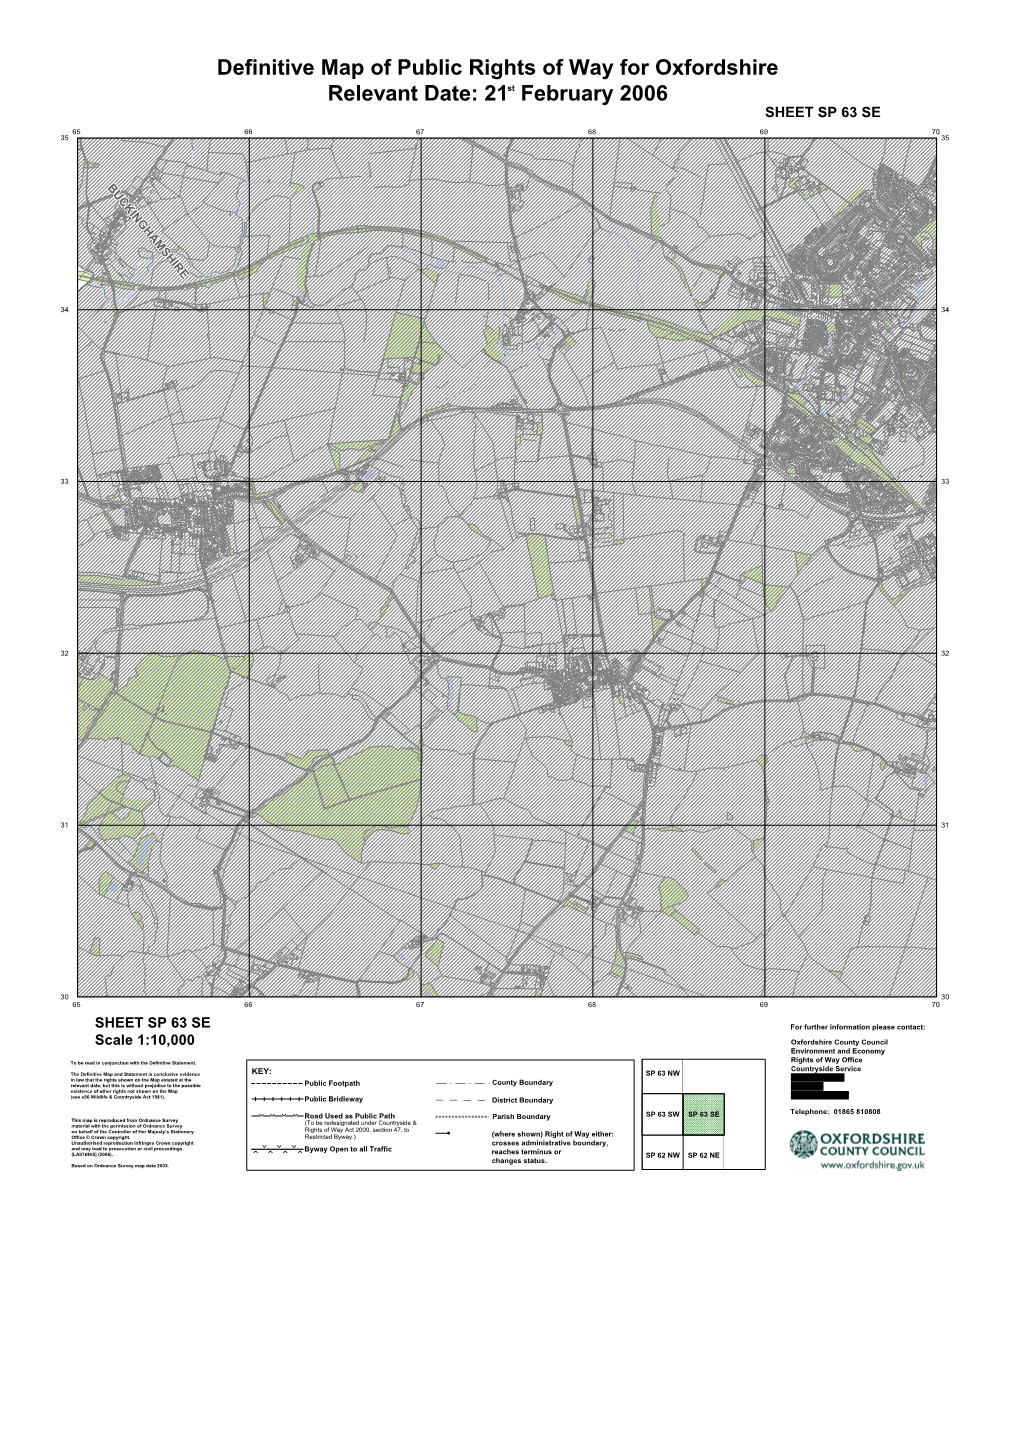 Definitive Map of Public Rights of Way for Oxfordshire Relevant Date: 21St February 2006 Colour SHEET SP 63 SE